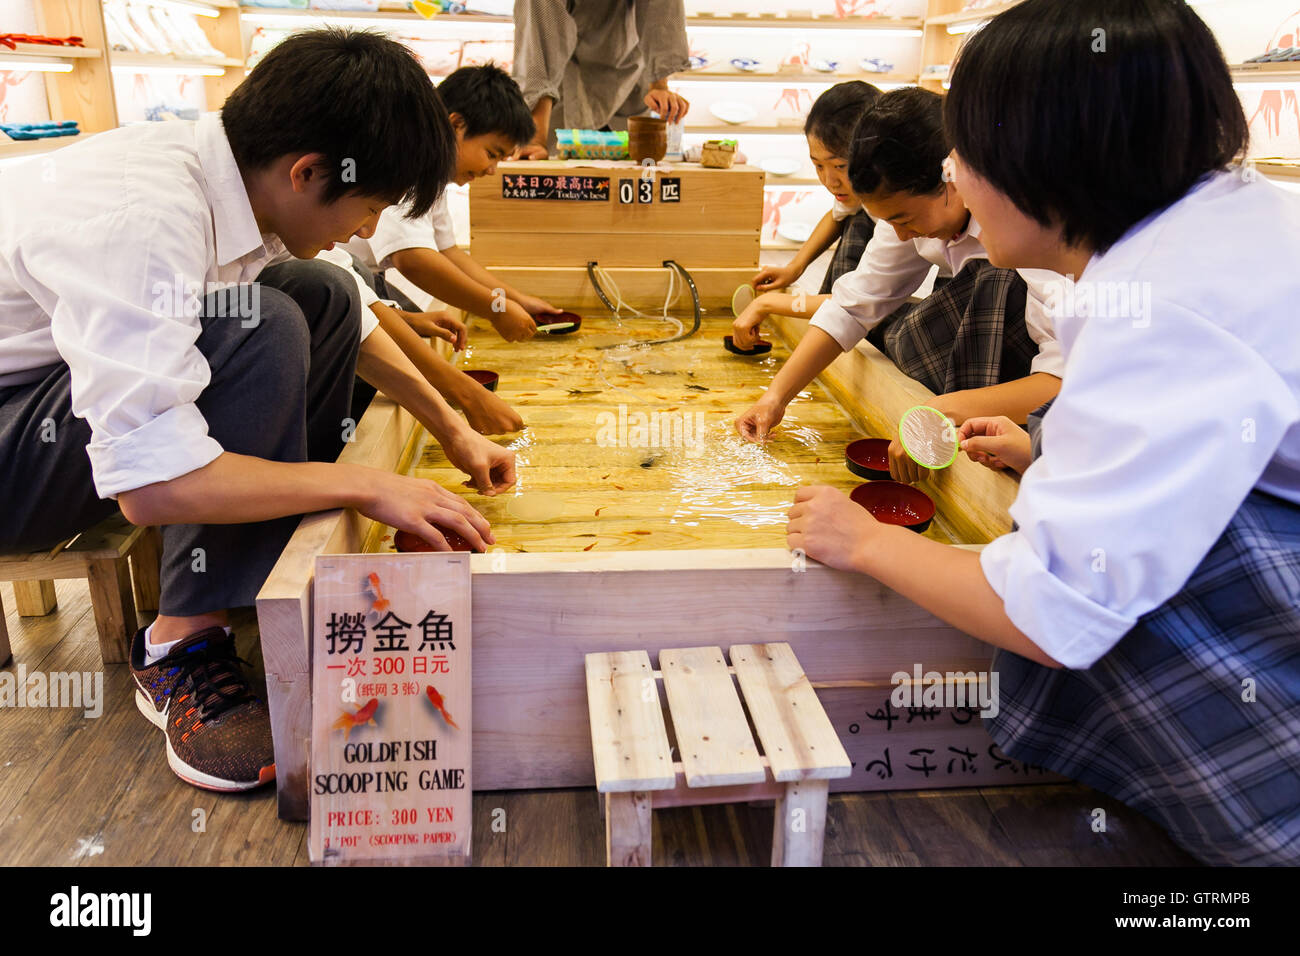 Customers try to catch small kingyo (goldfish) at the Asakusa Kingyo store on September 9, 2016, Tokyo, Japan. Asakusa Kingyo is a goldfish concept store where customers can buy various kinds of traditional Japanese goldfish shaped gifts. The store also challenges customers to play the Goldfish Scooping Game to scoop goldfish or discount coupons. The store opened two months ago, and customers, especially foreigners, who have never been to a Japanese summer festival have the opportunity to enjoy the traditional game. © Rodrigo Reyes Marin/AFLO/Alamy Live News Stock Photo